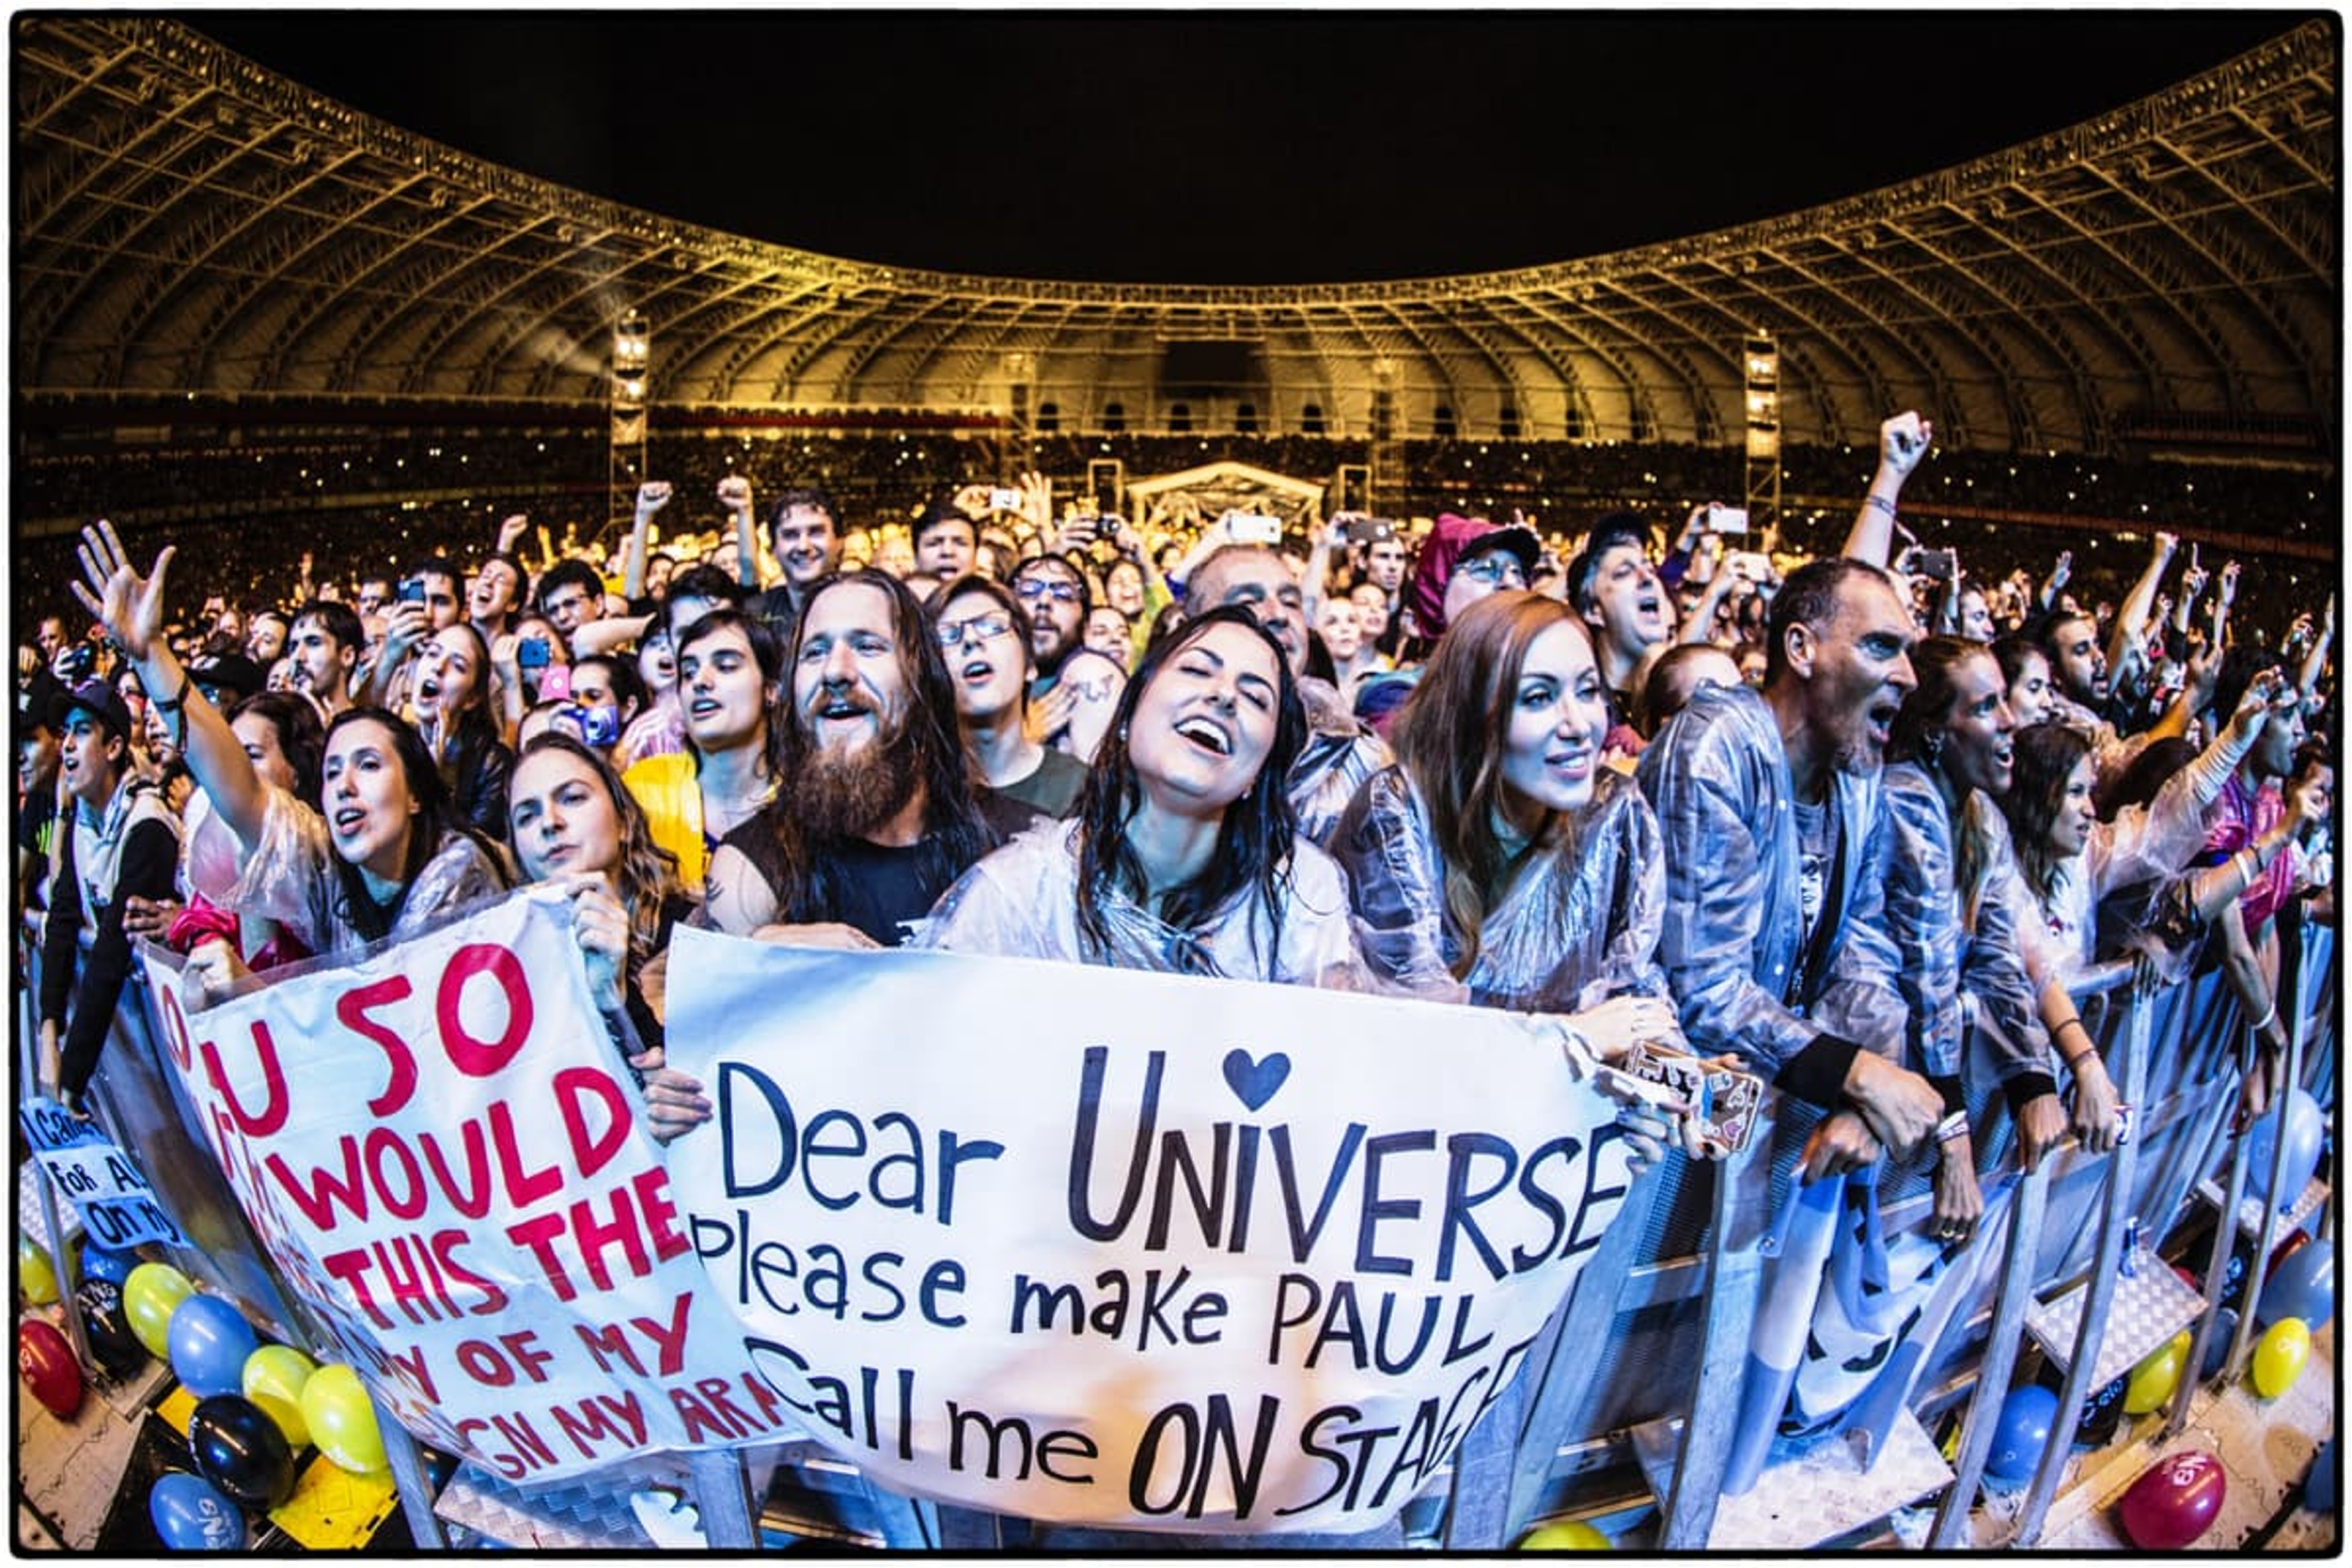 Fans during the Porto Alegre show in Brazil, 13th October 2017